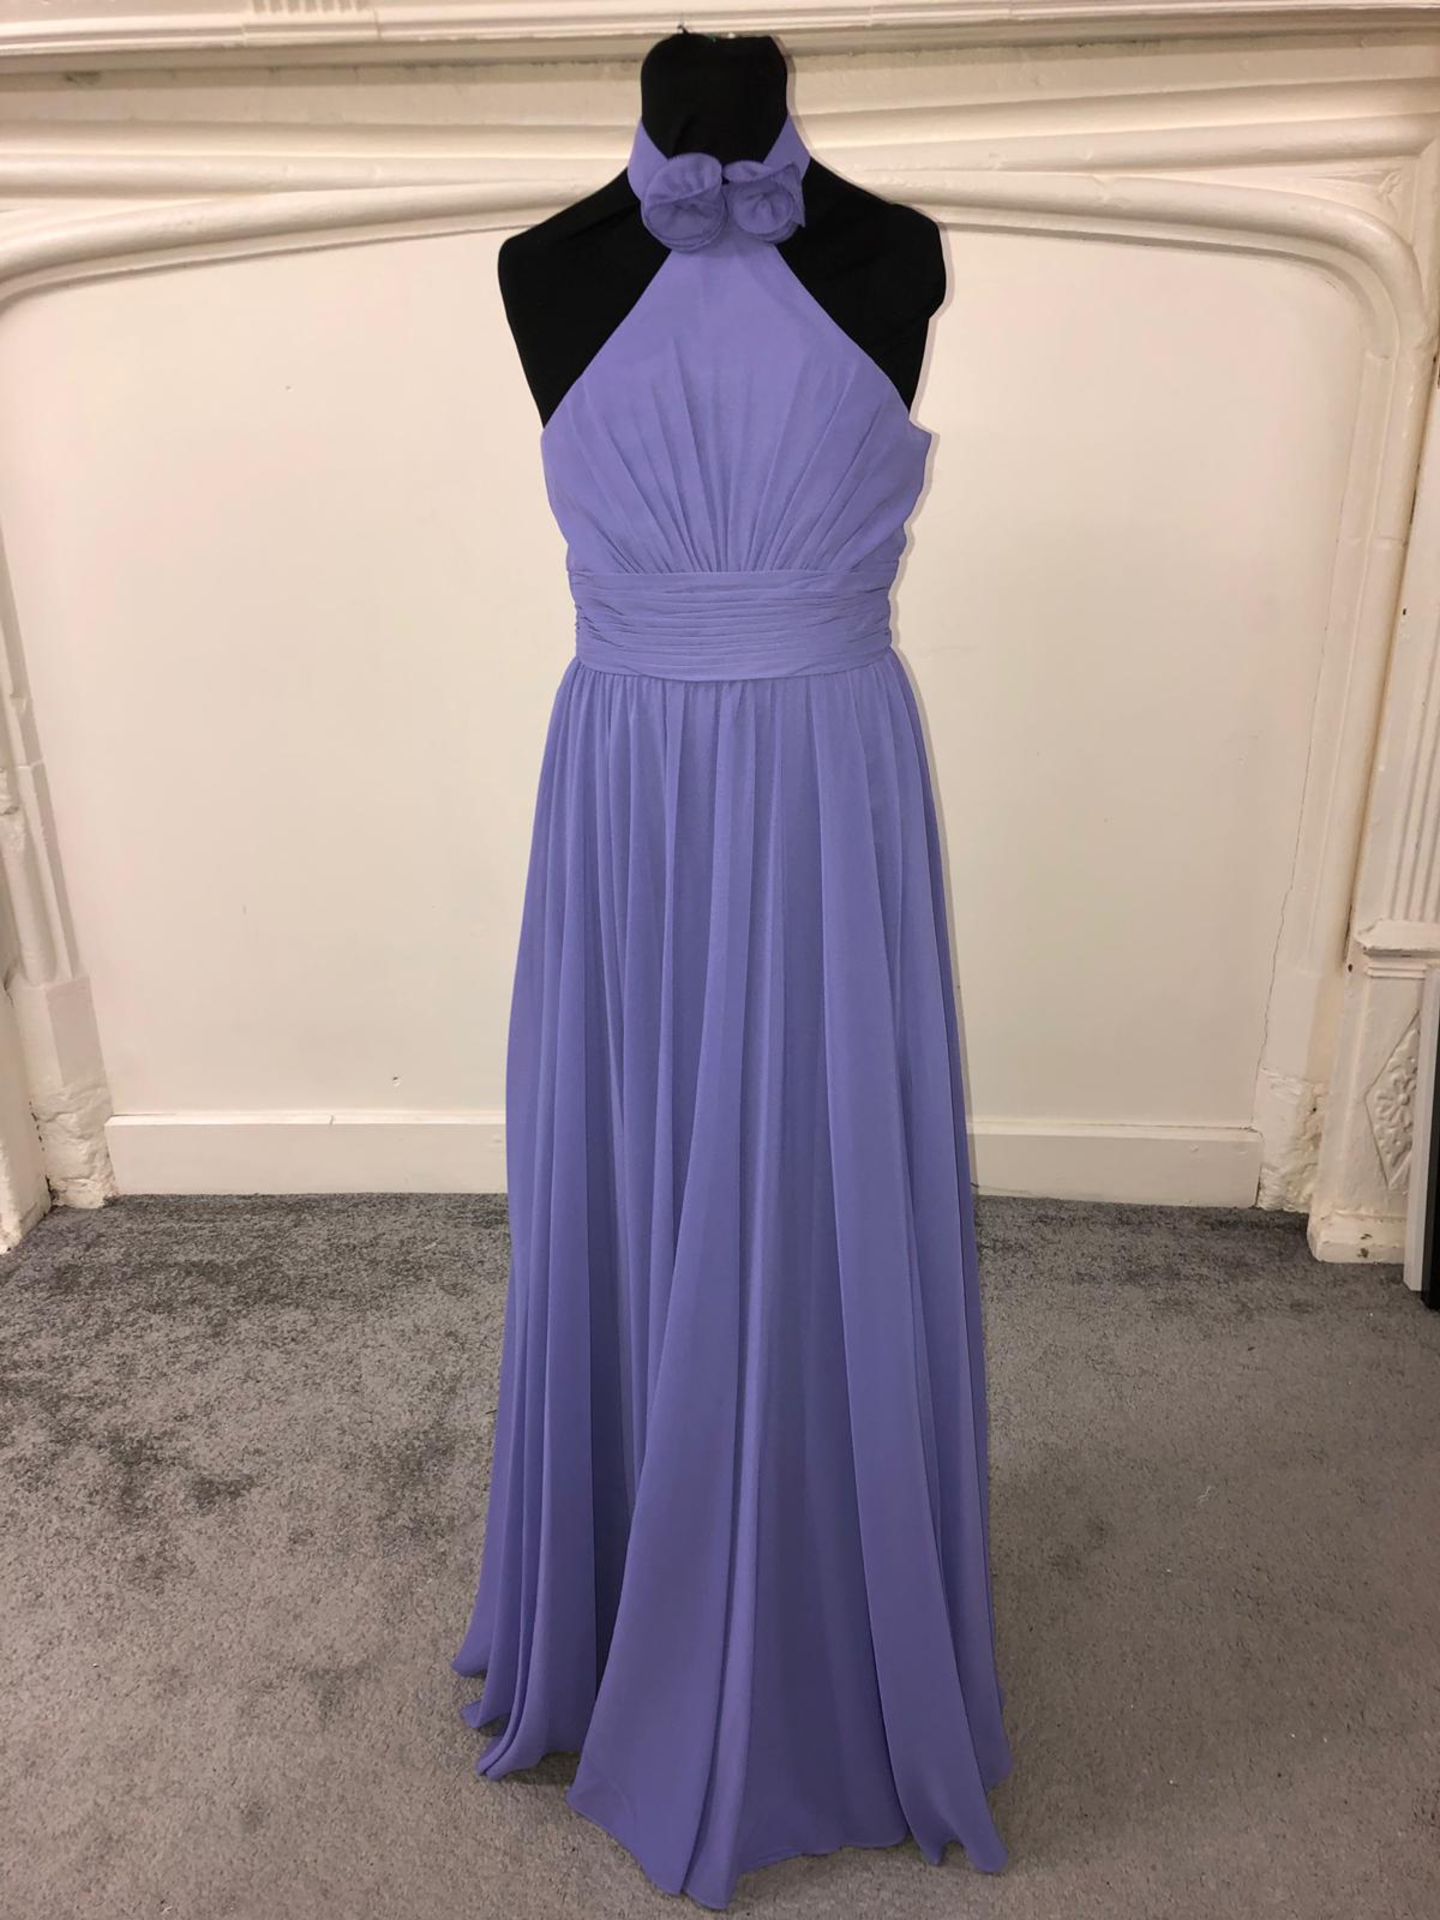 Bulk Lot of Prom, Pageant and Bridesmaid Dresses x 50. All From Alexia Designs